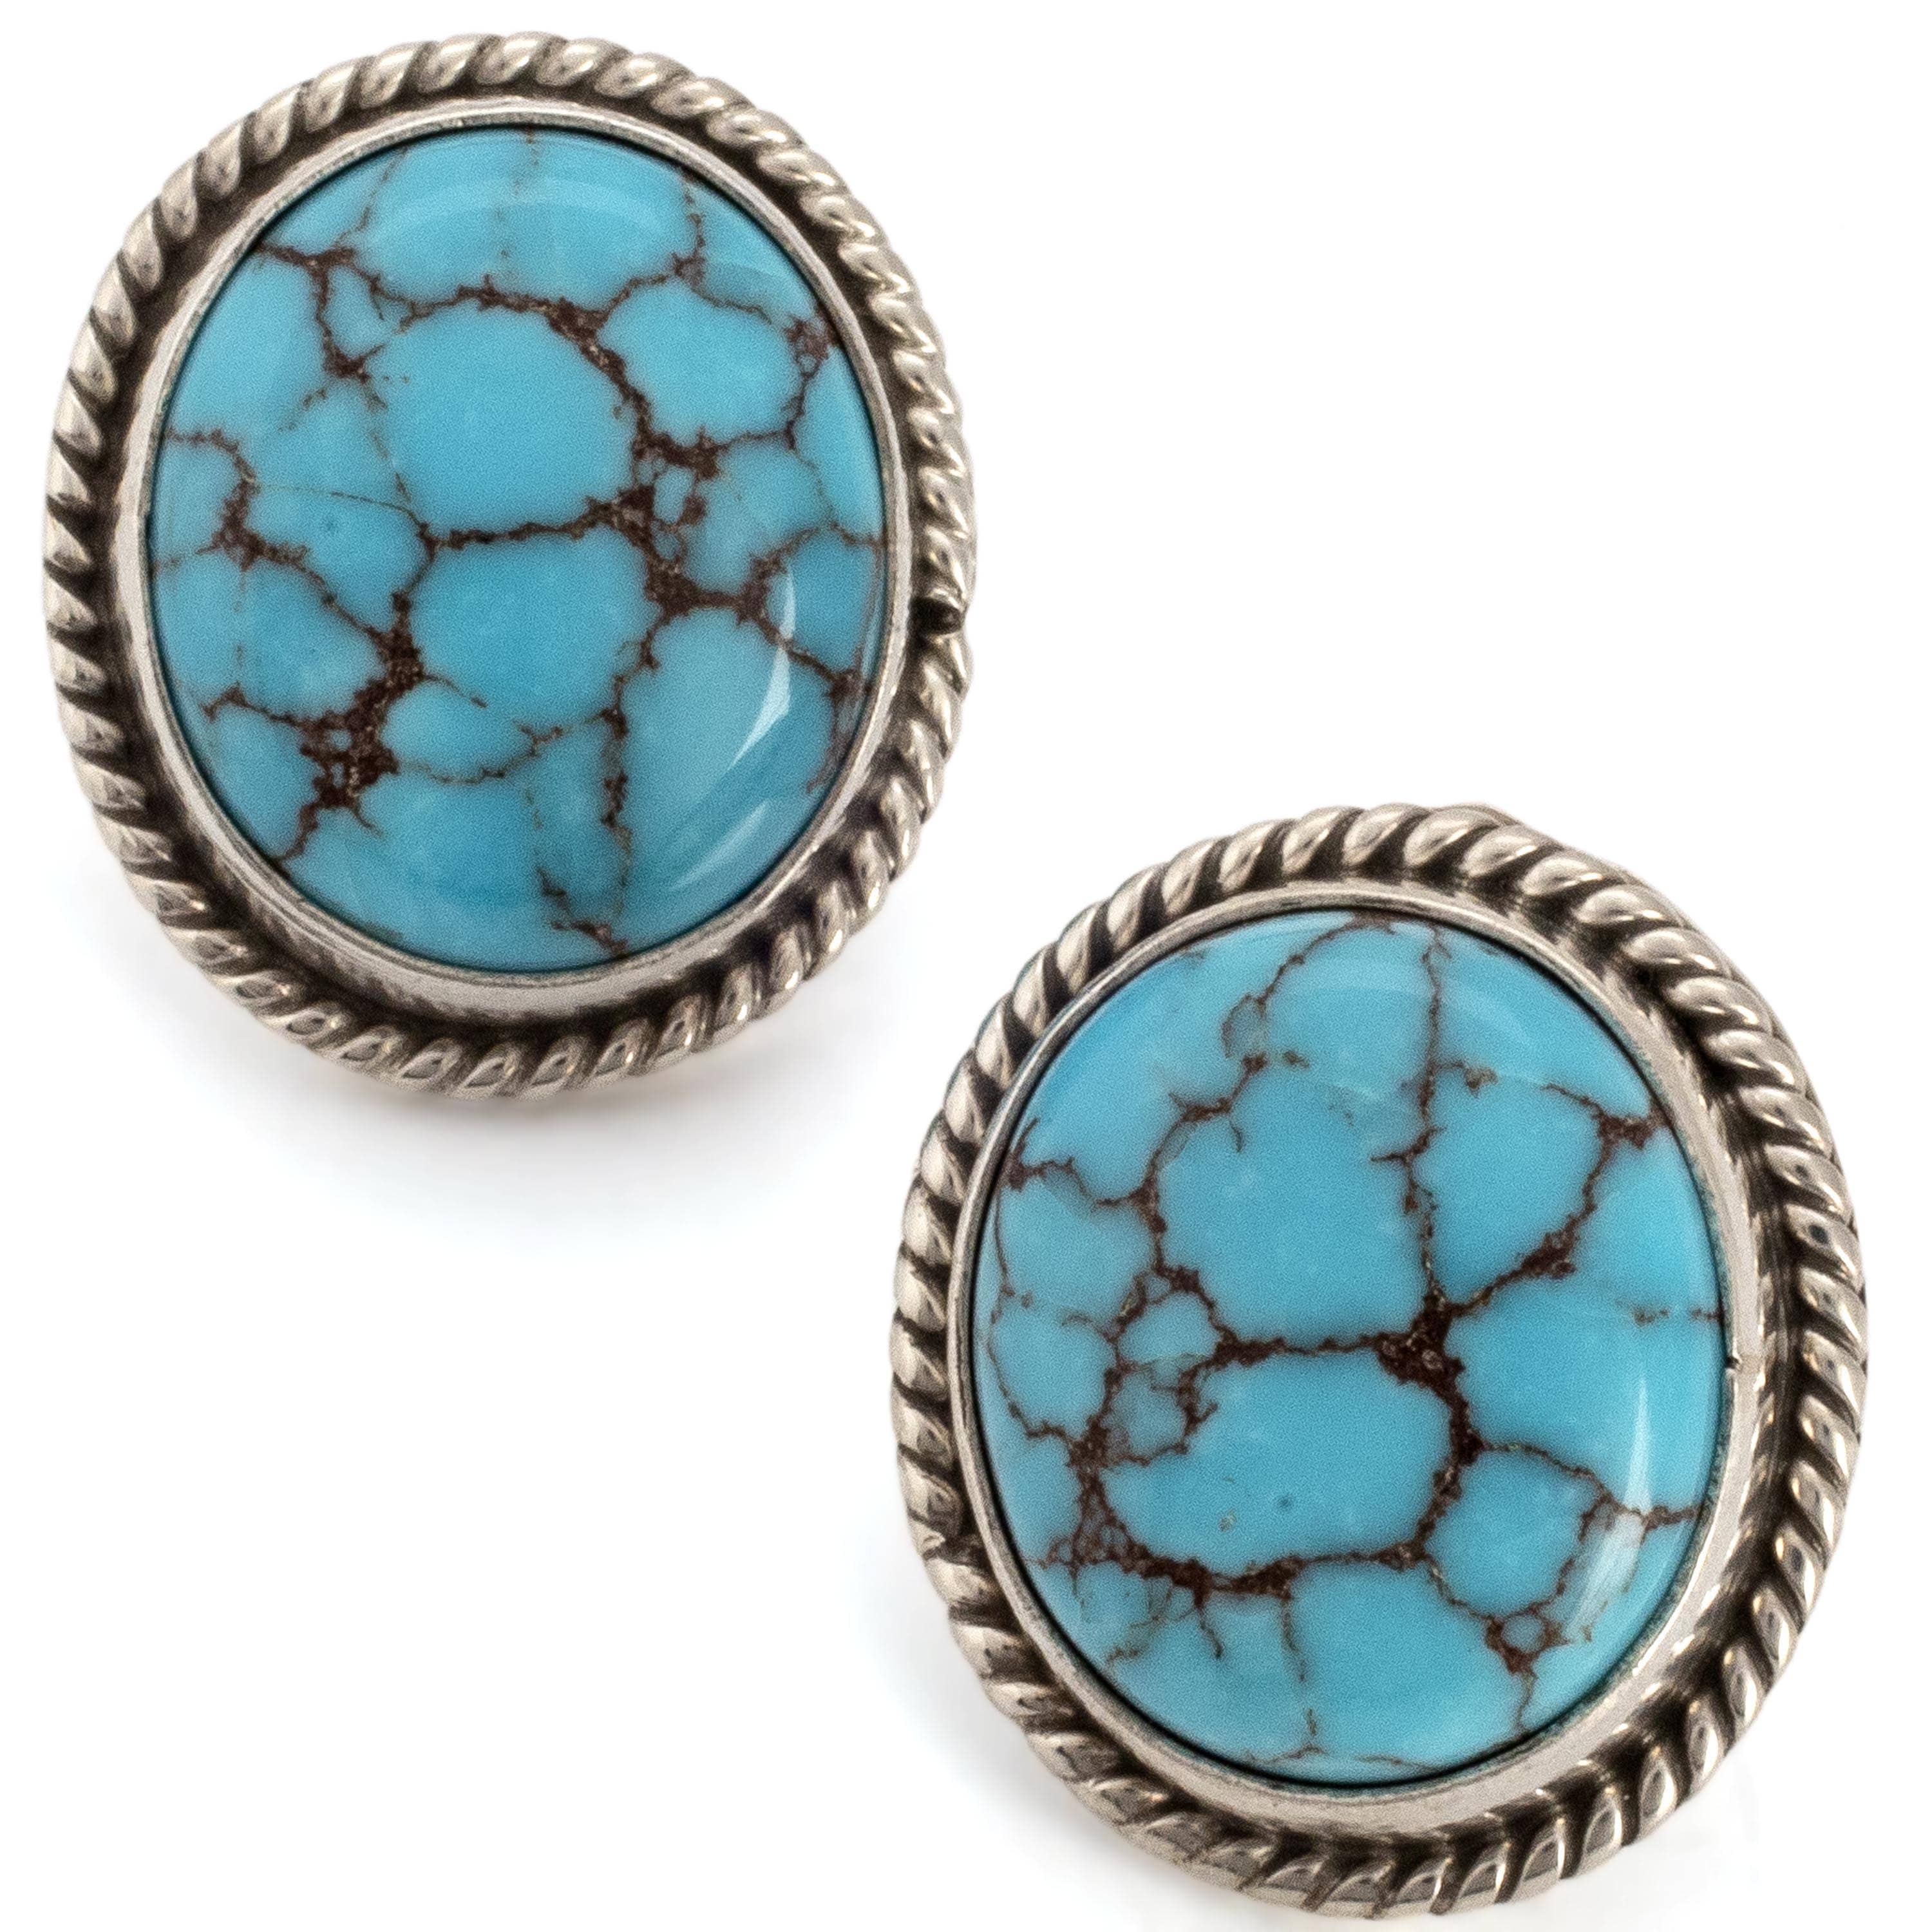 Kalifano Native American Jewelry Egyptian Turquoise Oval USA Native American Made Sterling Silver Earrings NAE800.005